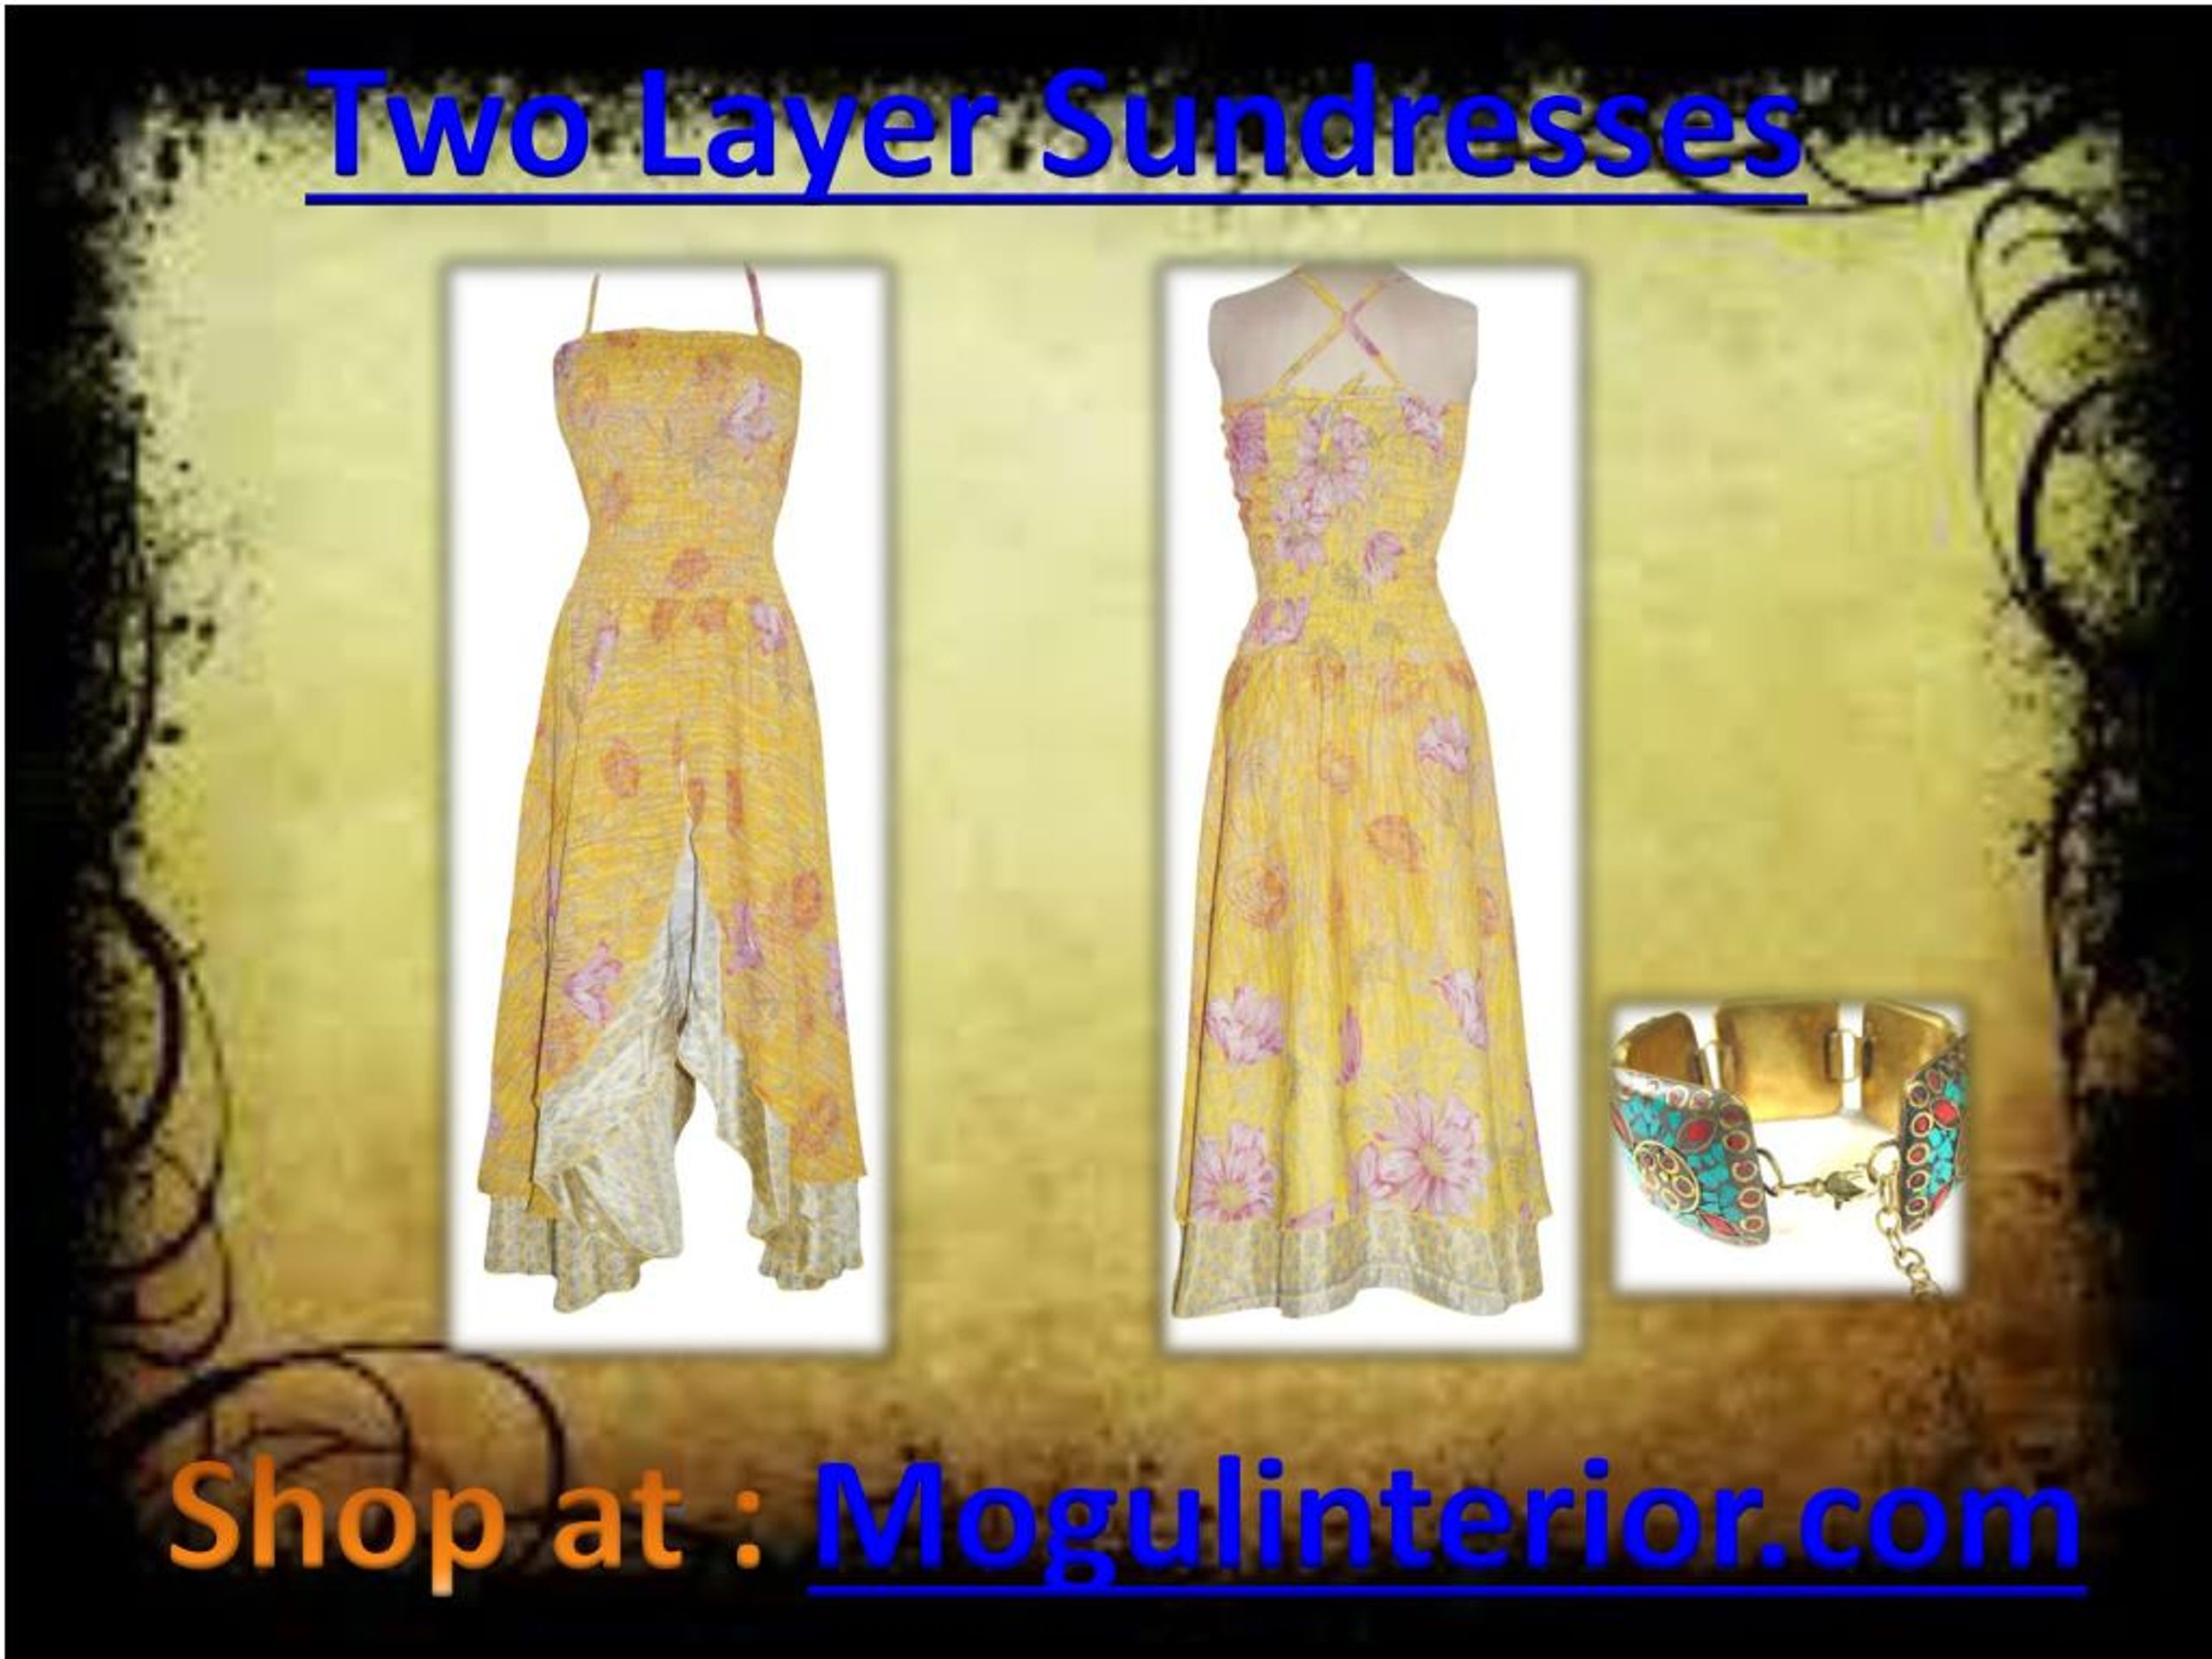 PPT - Two Layer Sundresses by Mogulinterior PowerPoint Presentation ...